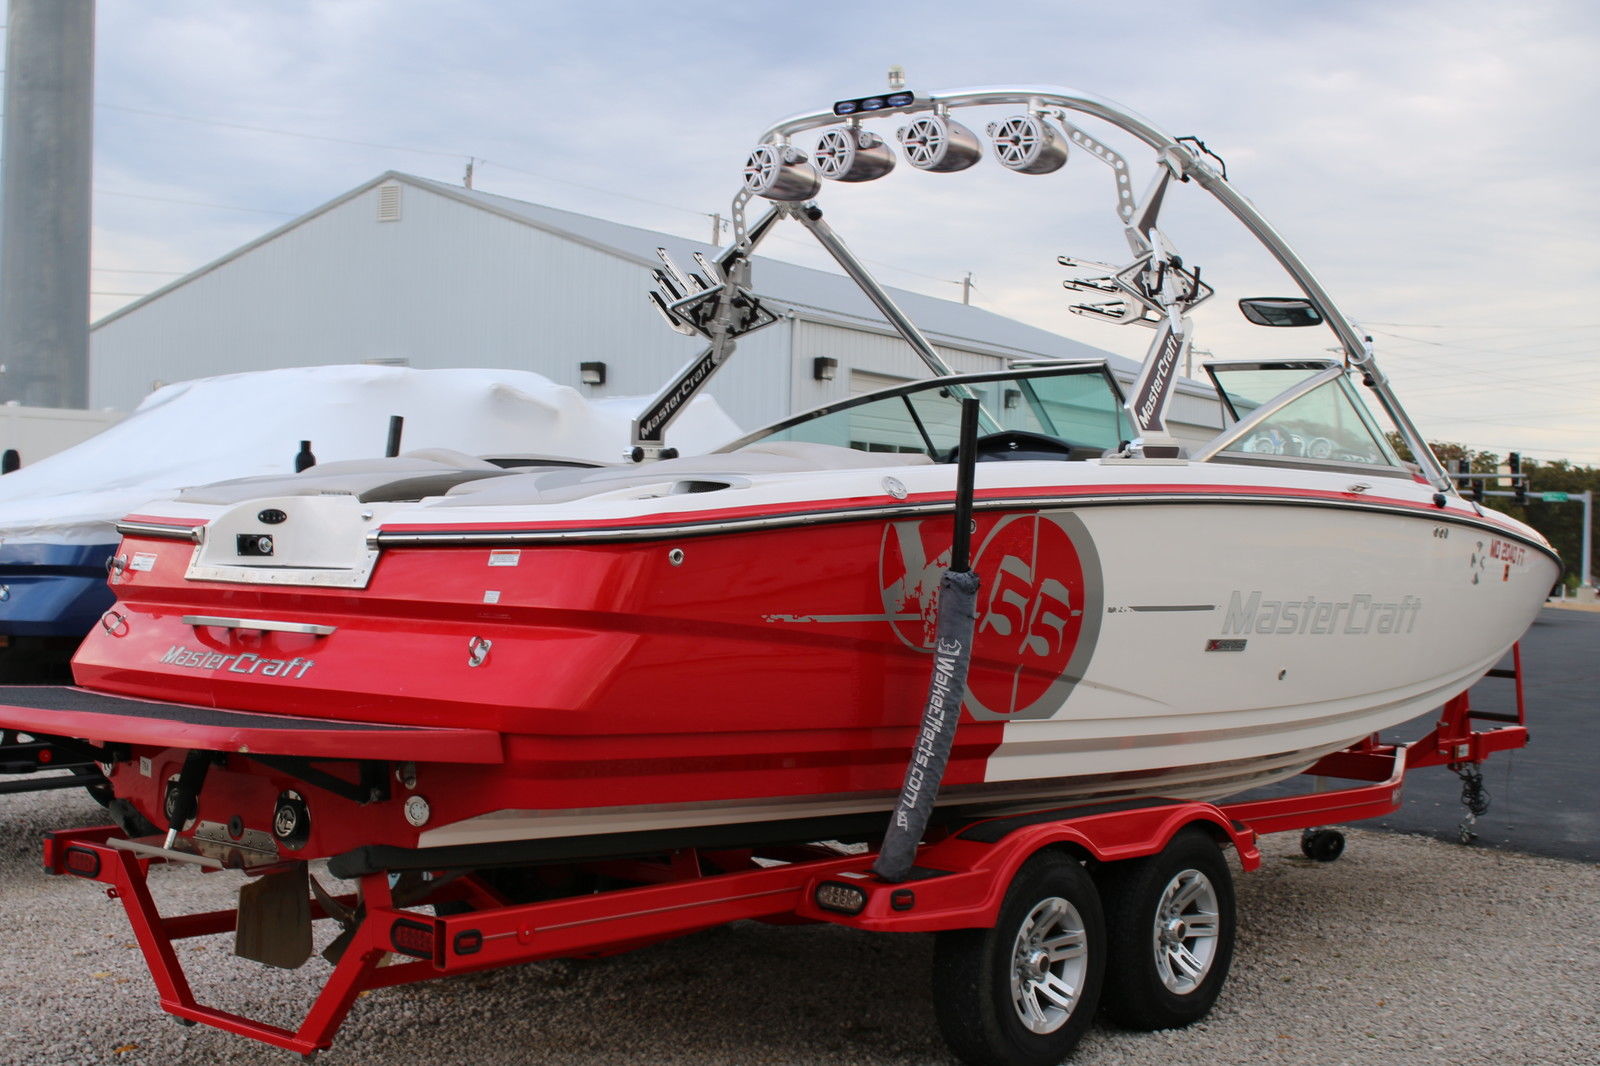 MasterCraft X55 2009 for sale for $73,900 - Boats-from-USA.com